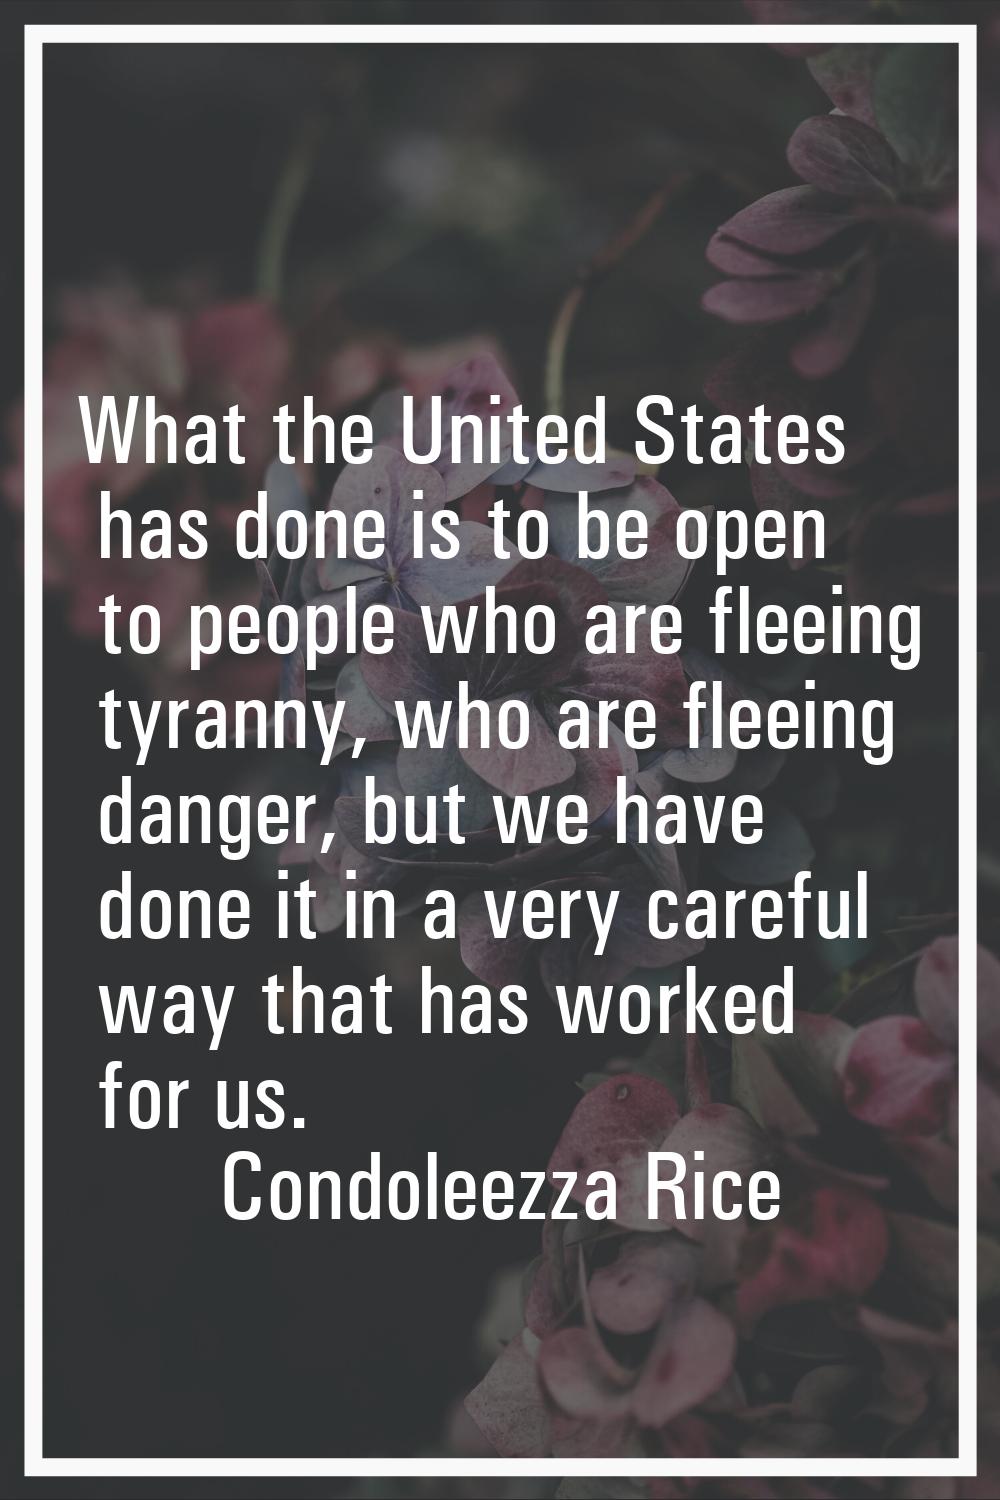 What the United States has done is to be open to people who are fleeing tyranny, who are fleeing da